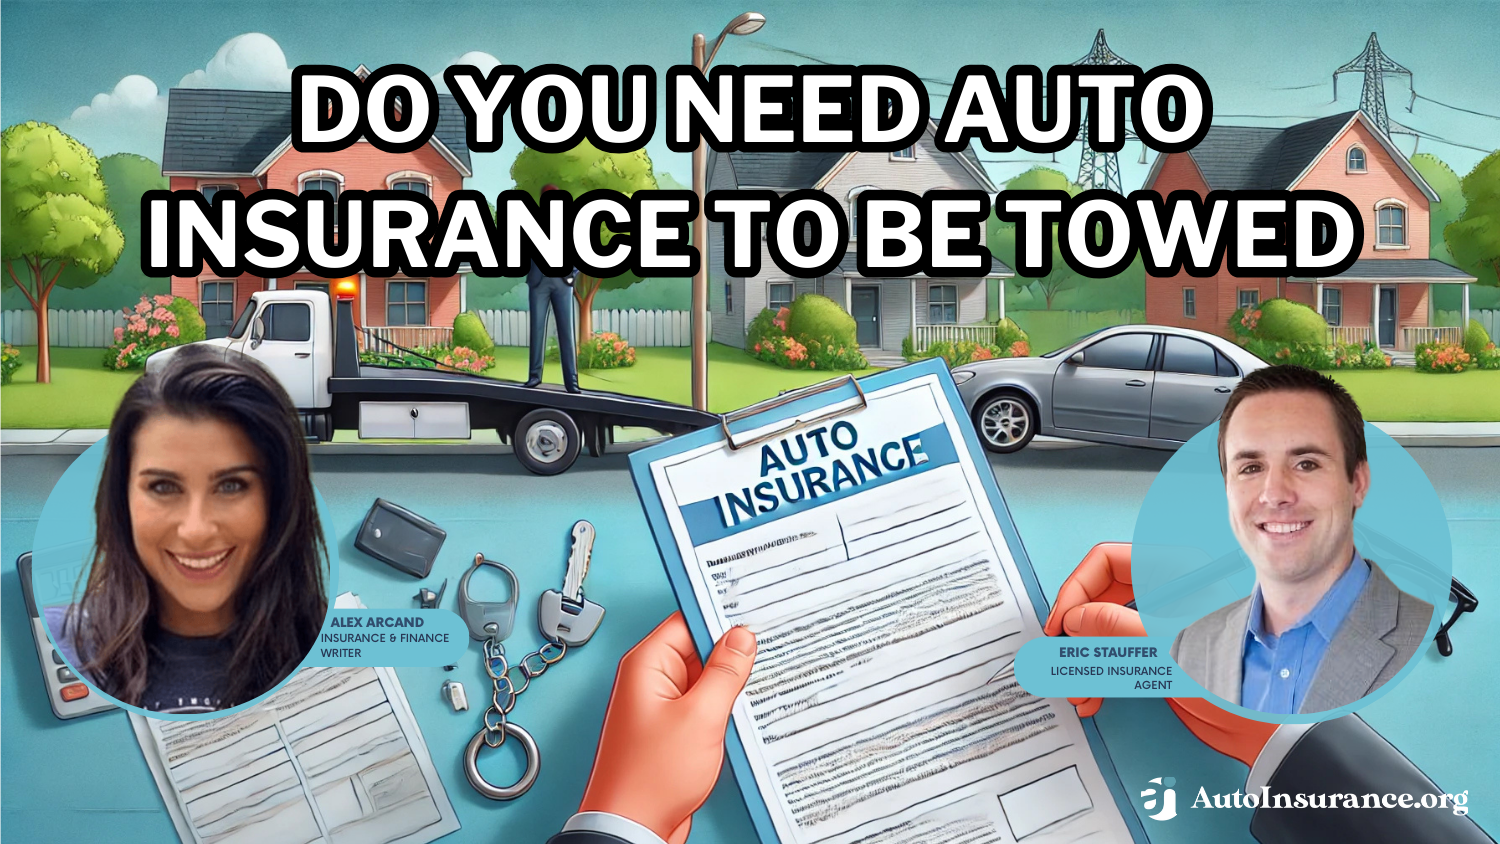 Do you need auto insurance to be towed?